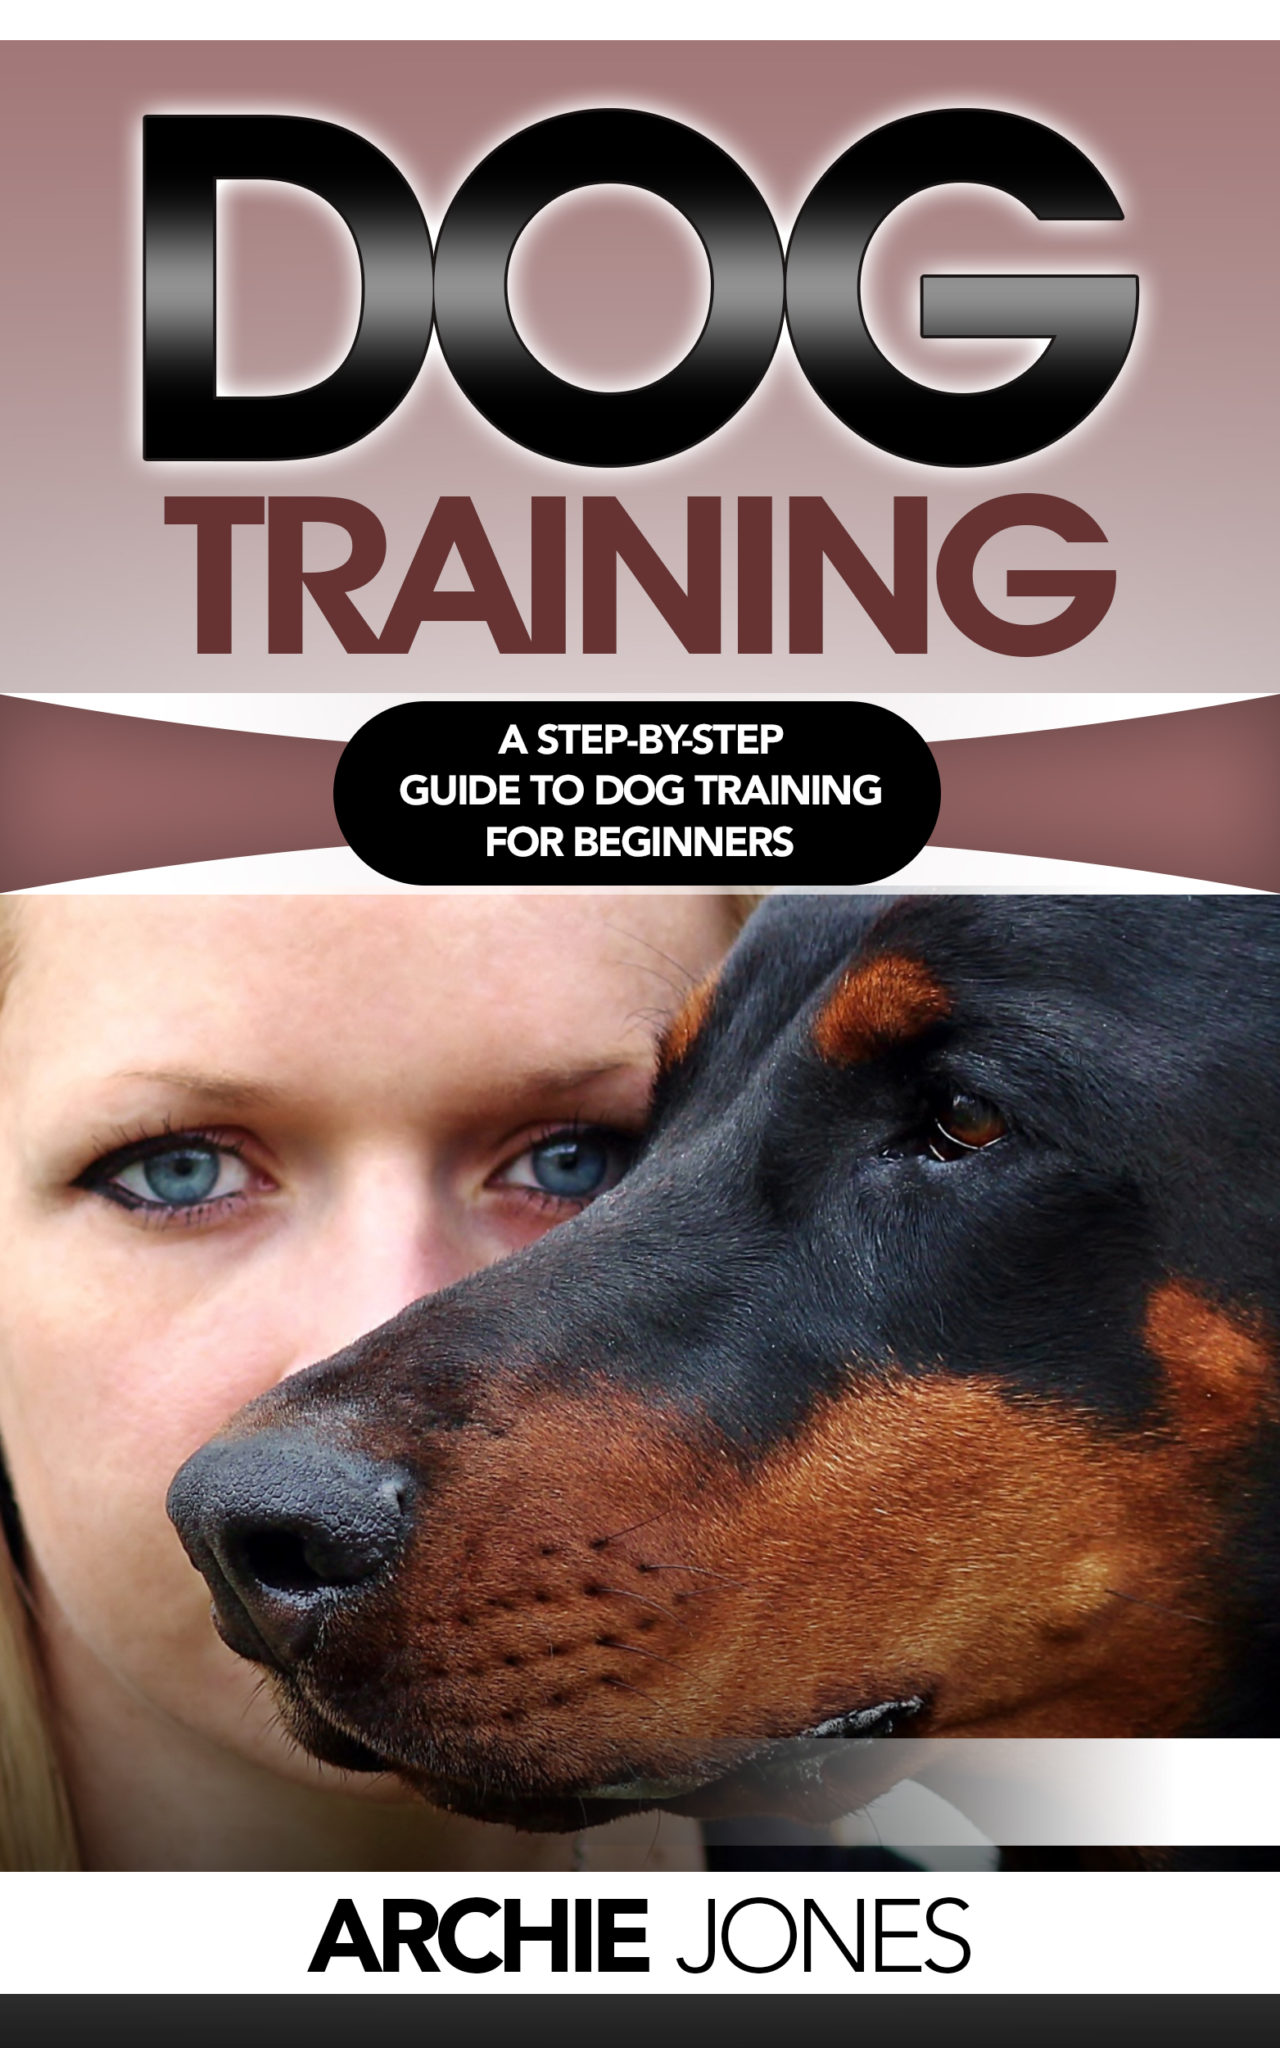 FREE: Dog Training: a Step-by-step Guide to Dog training for Beginners by Archie Jones